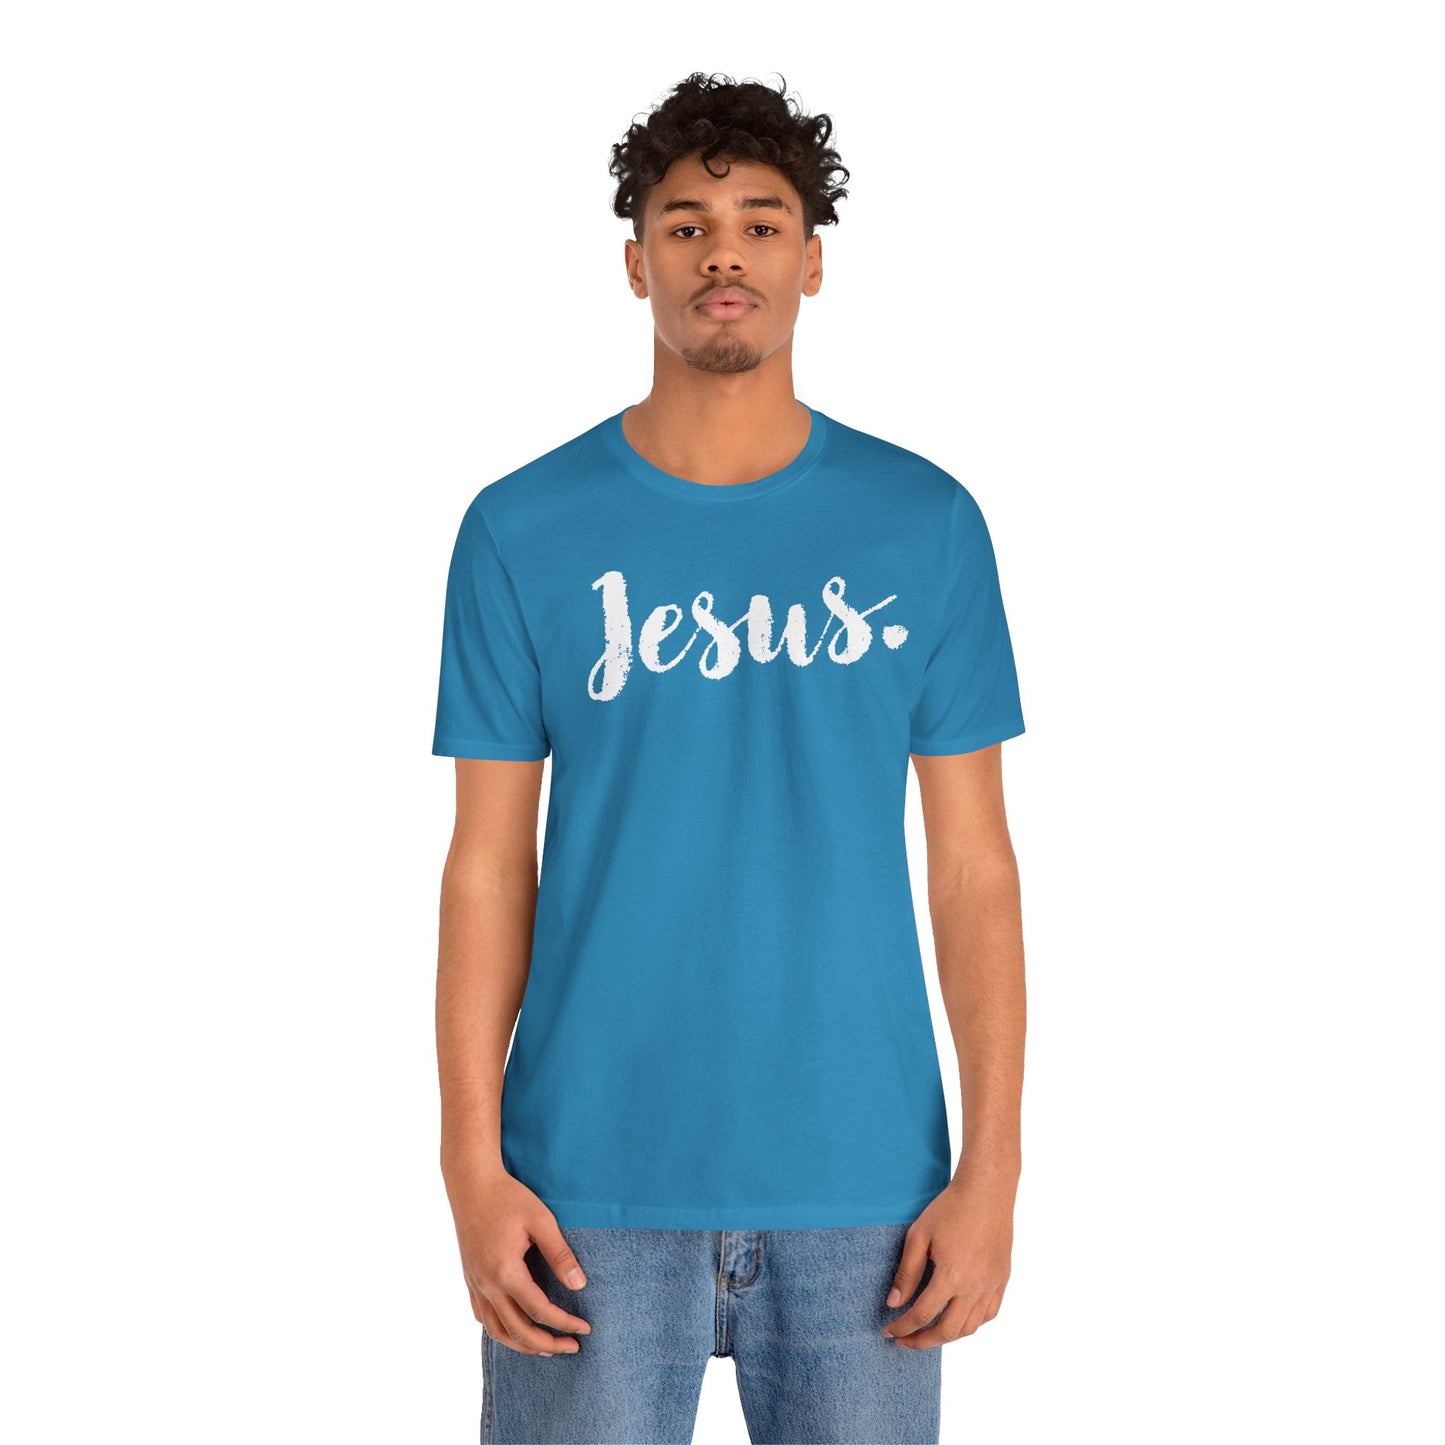 JESUS. There is POWER in the NAME of Jesus. Wearing & Sharing The Word. Christian. Faith. Hope. Believe. Shirts. Gifts.